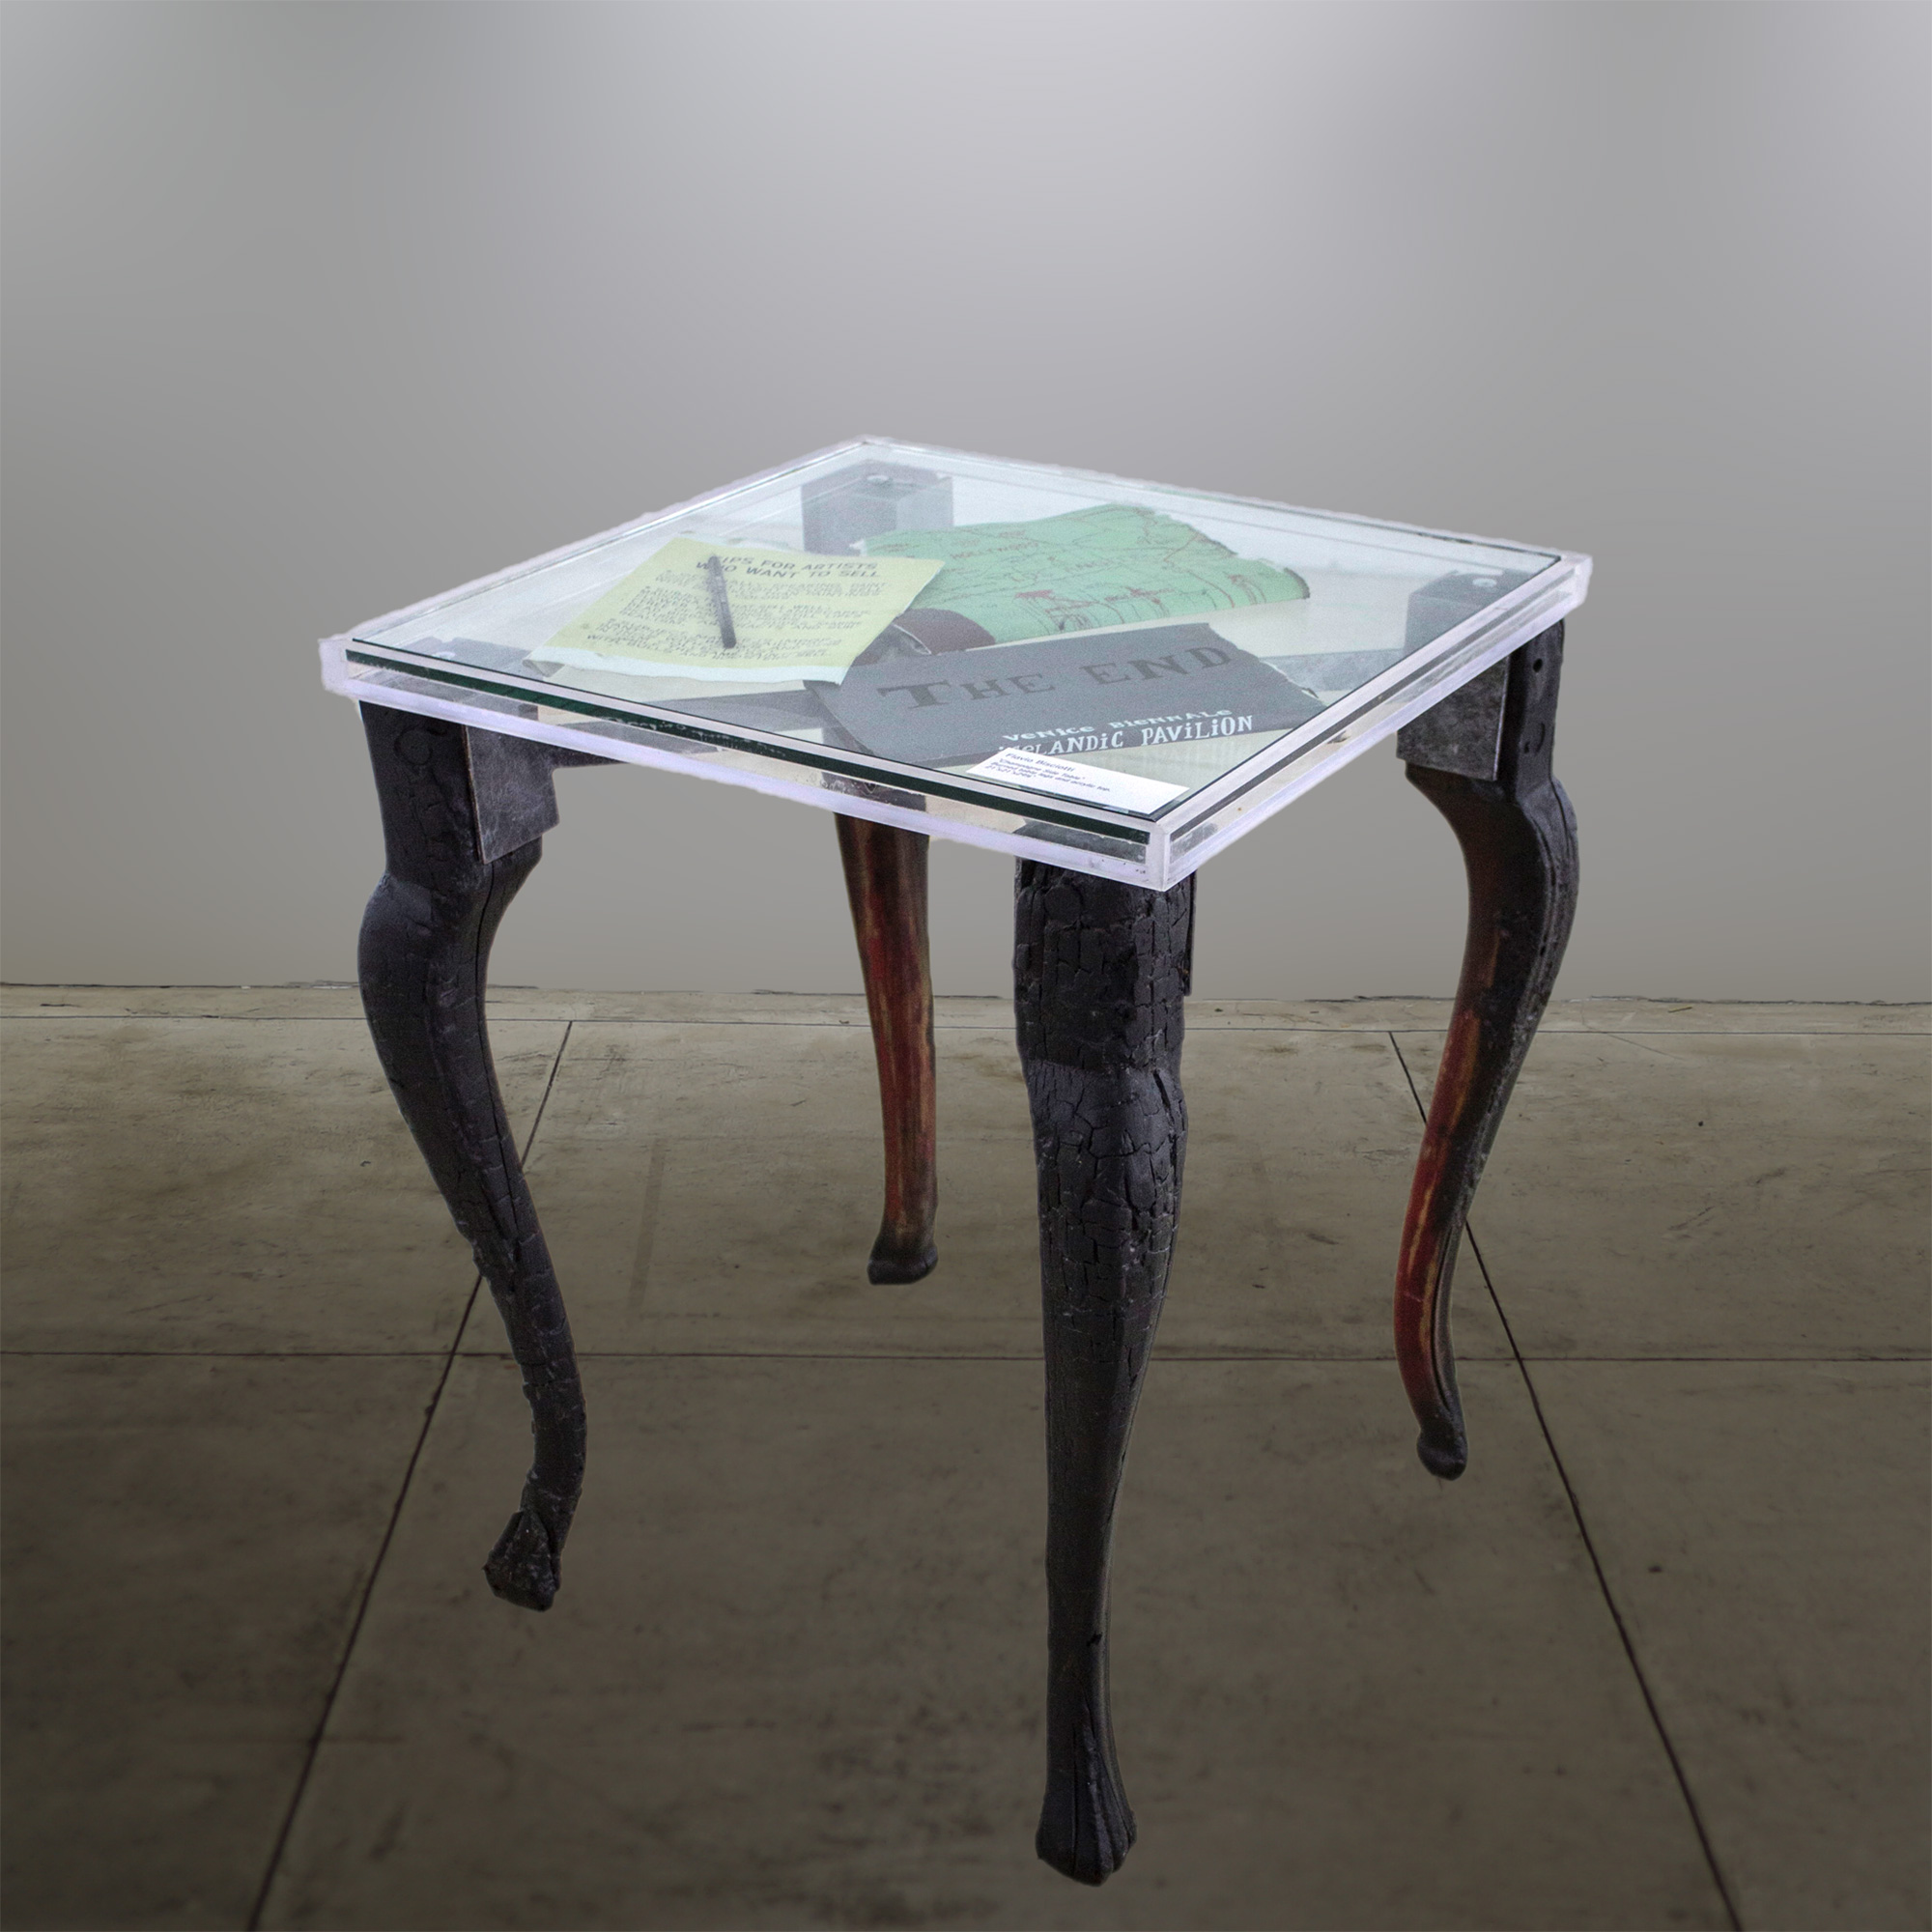 “Champagne Side Table” - Burned table legs and acrylic top - 21”x21”x29-1/2” - © Flavio Bisciotti